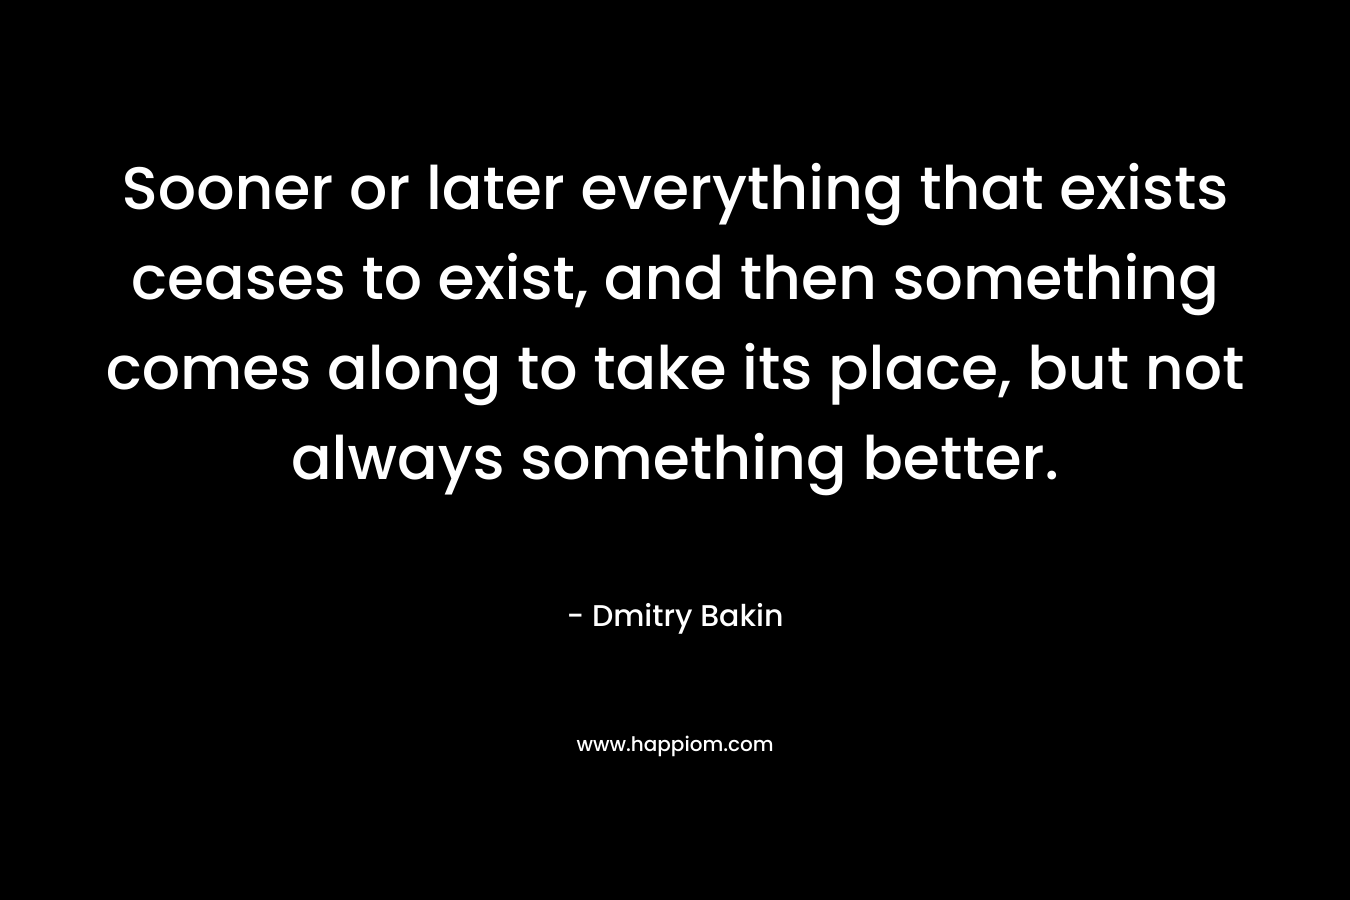 Sooner or later everything that exists ceases to exist, and then something comes along to take its place, but not always something better.